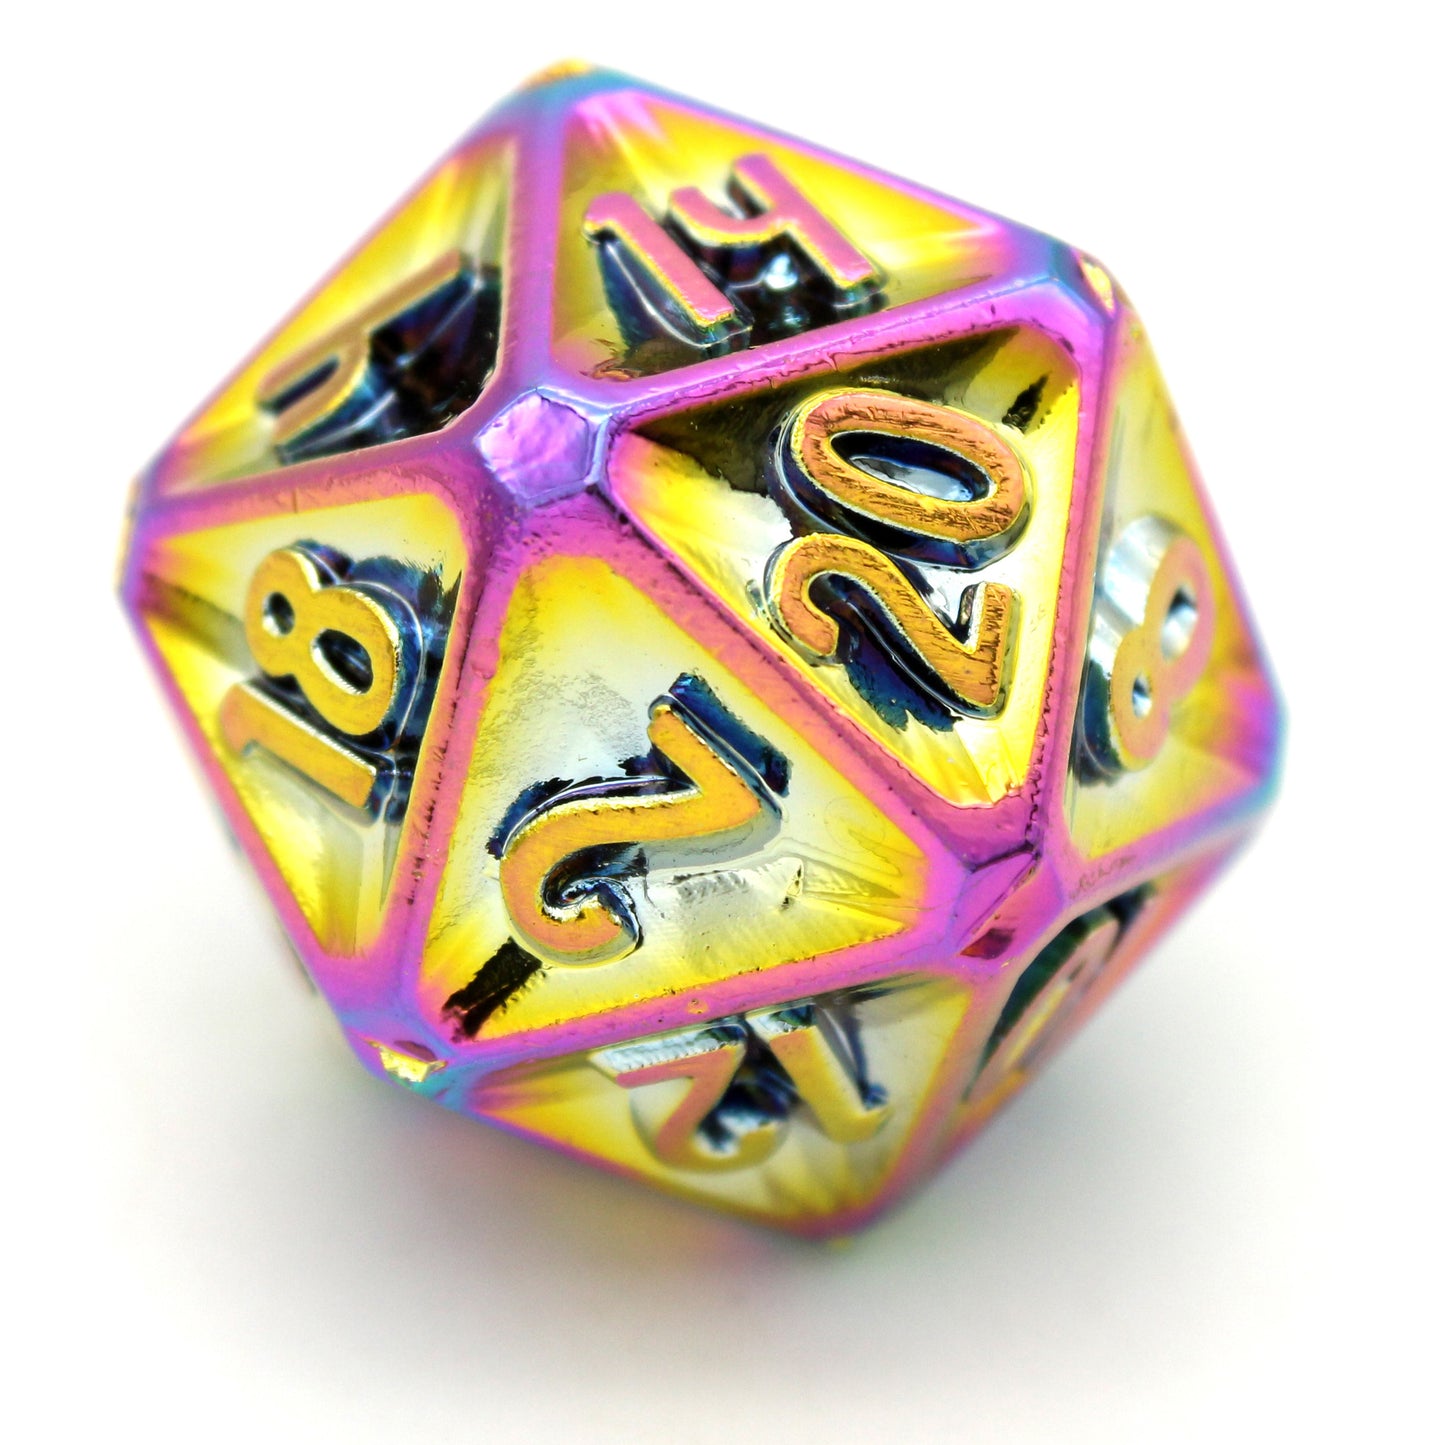 Oath of the Watchers is a Dice Envy Exclusive 8-piece set of zinc-alloy, concave, metal dice - neochrome in all the colors of the astral plane. It is part of the Oathbound collection.